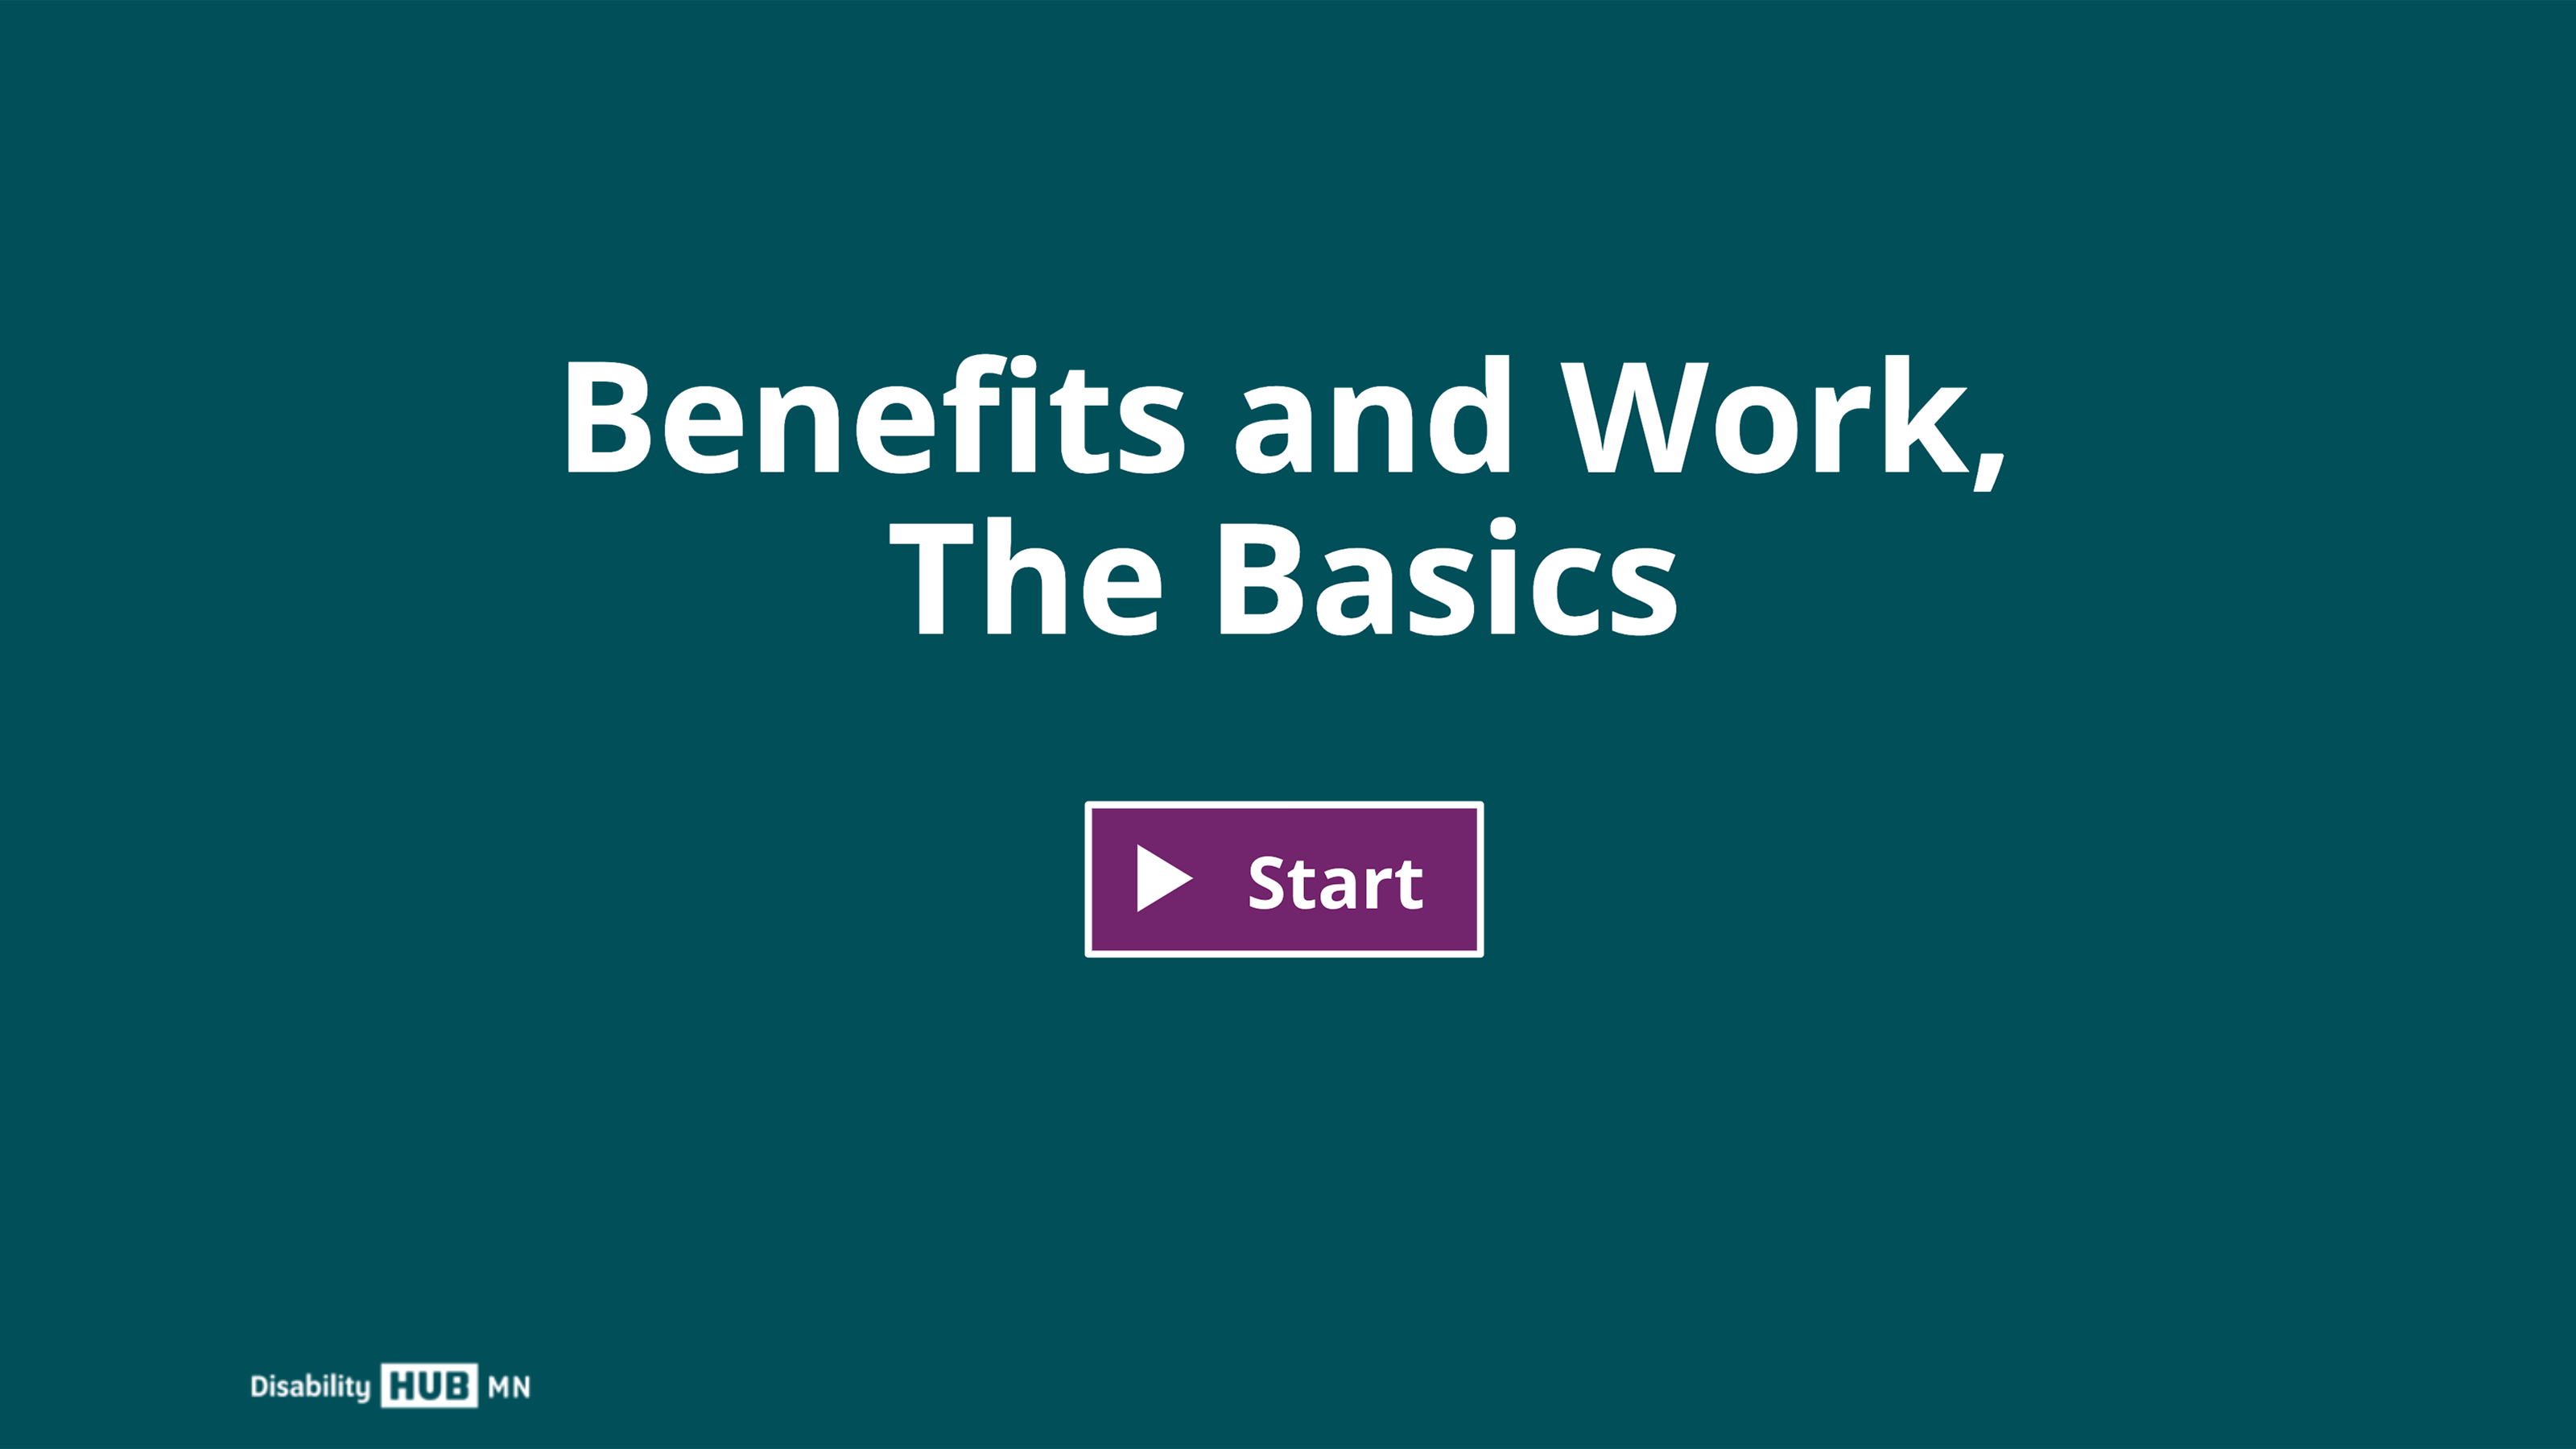 Click this image to begin the Benefits and Work, The Basics e-learning